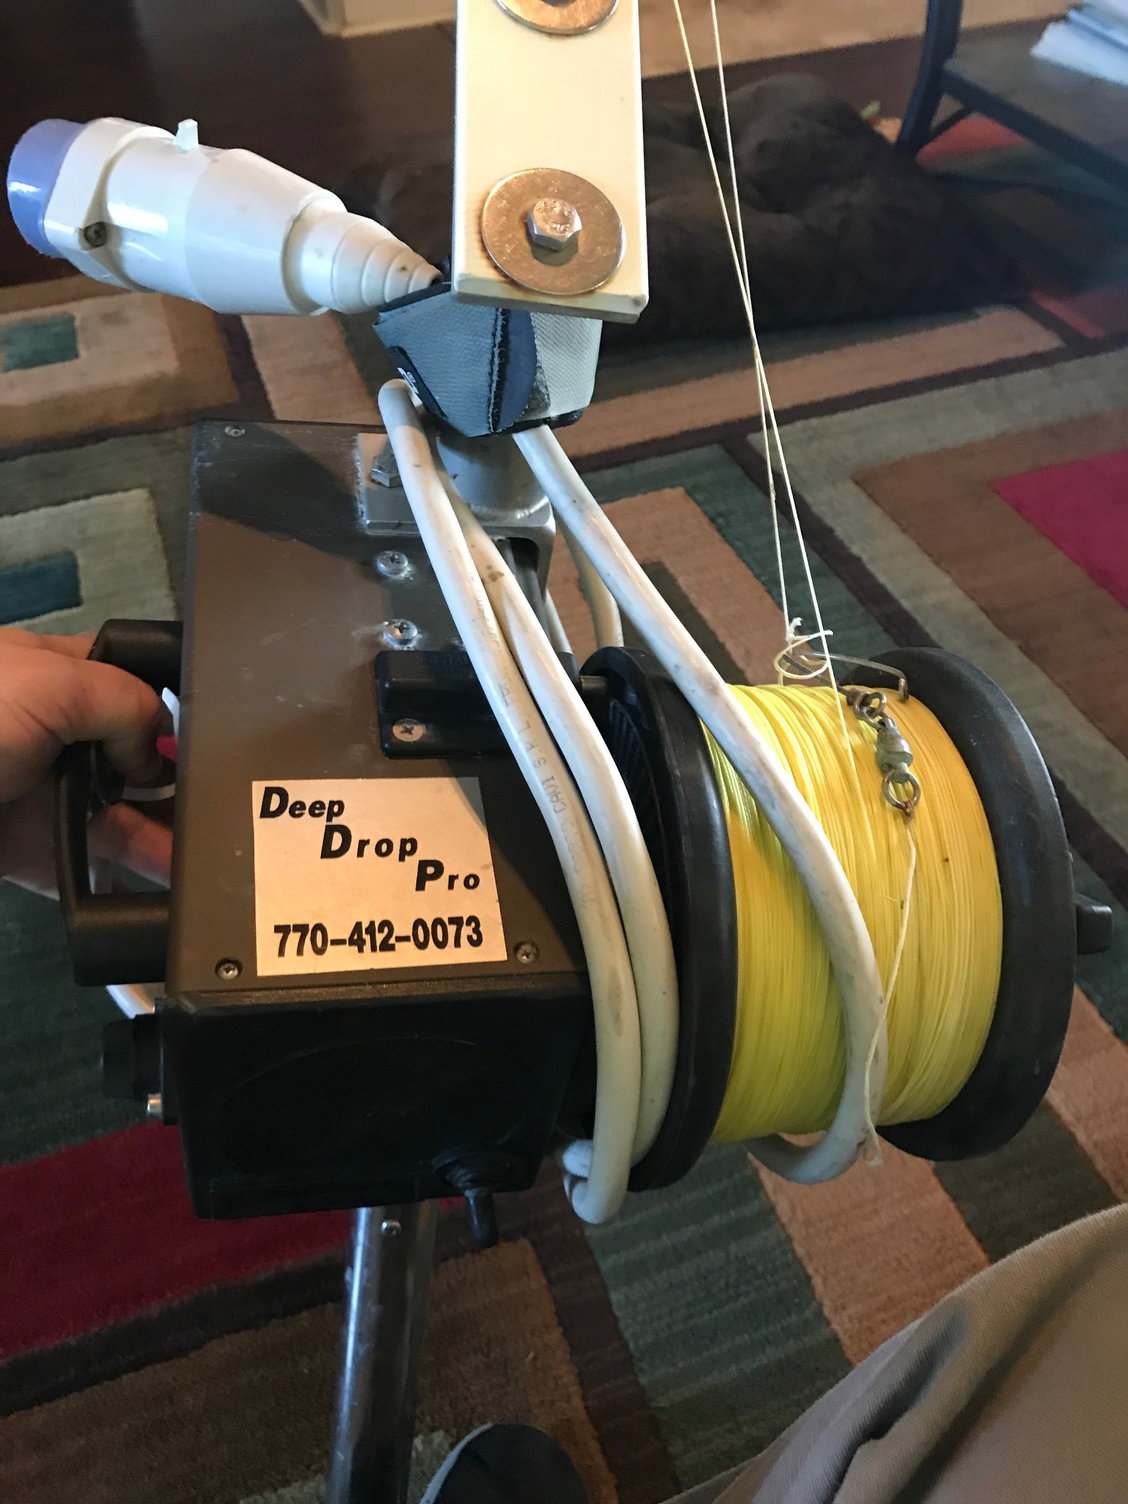 Kristal electric reel plugs - The Hull Truth - Boating and Fishing